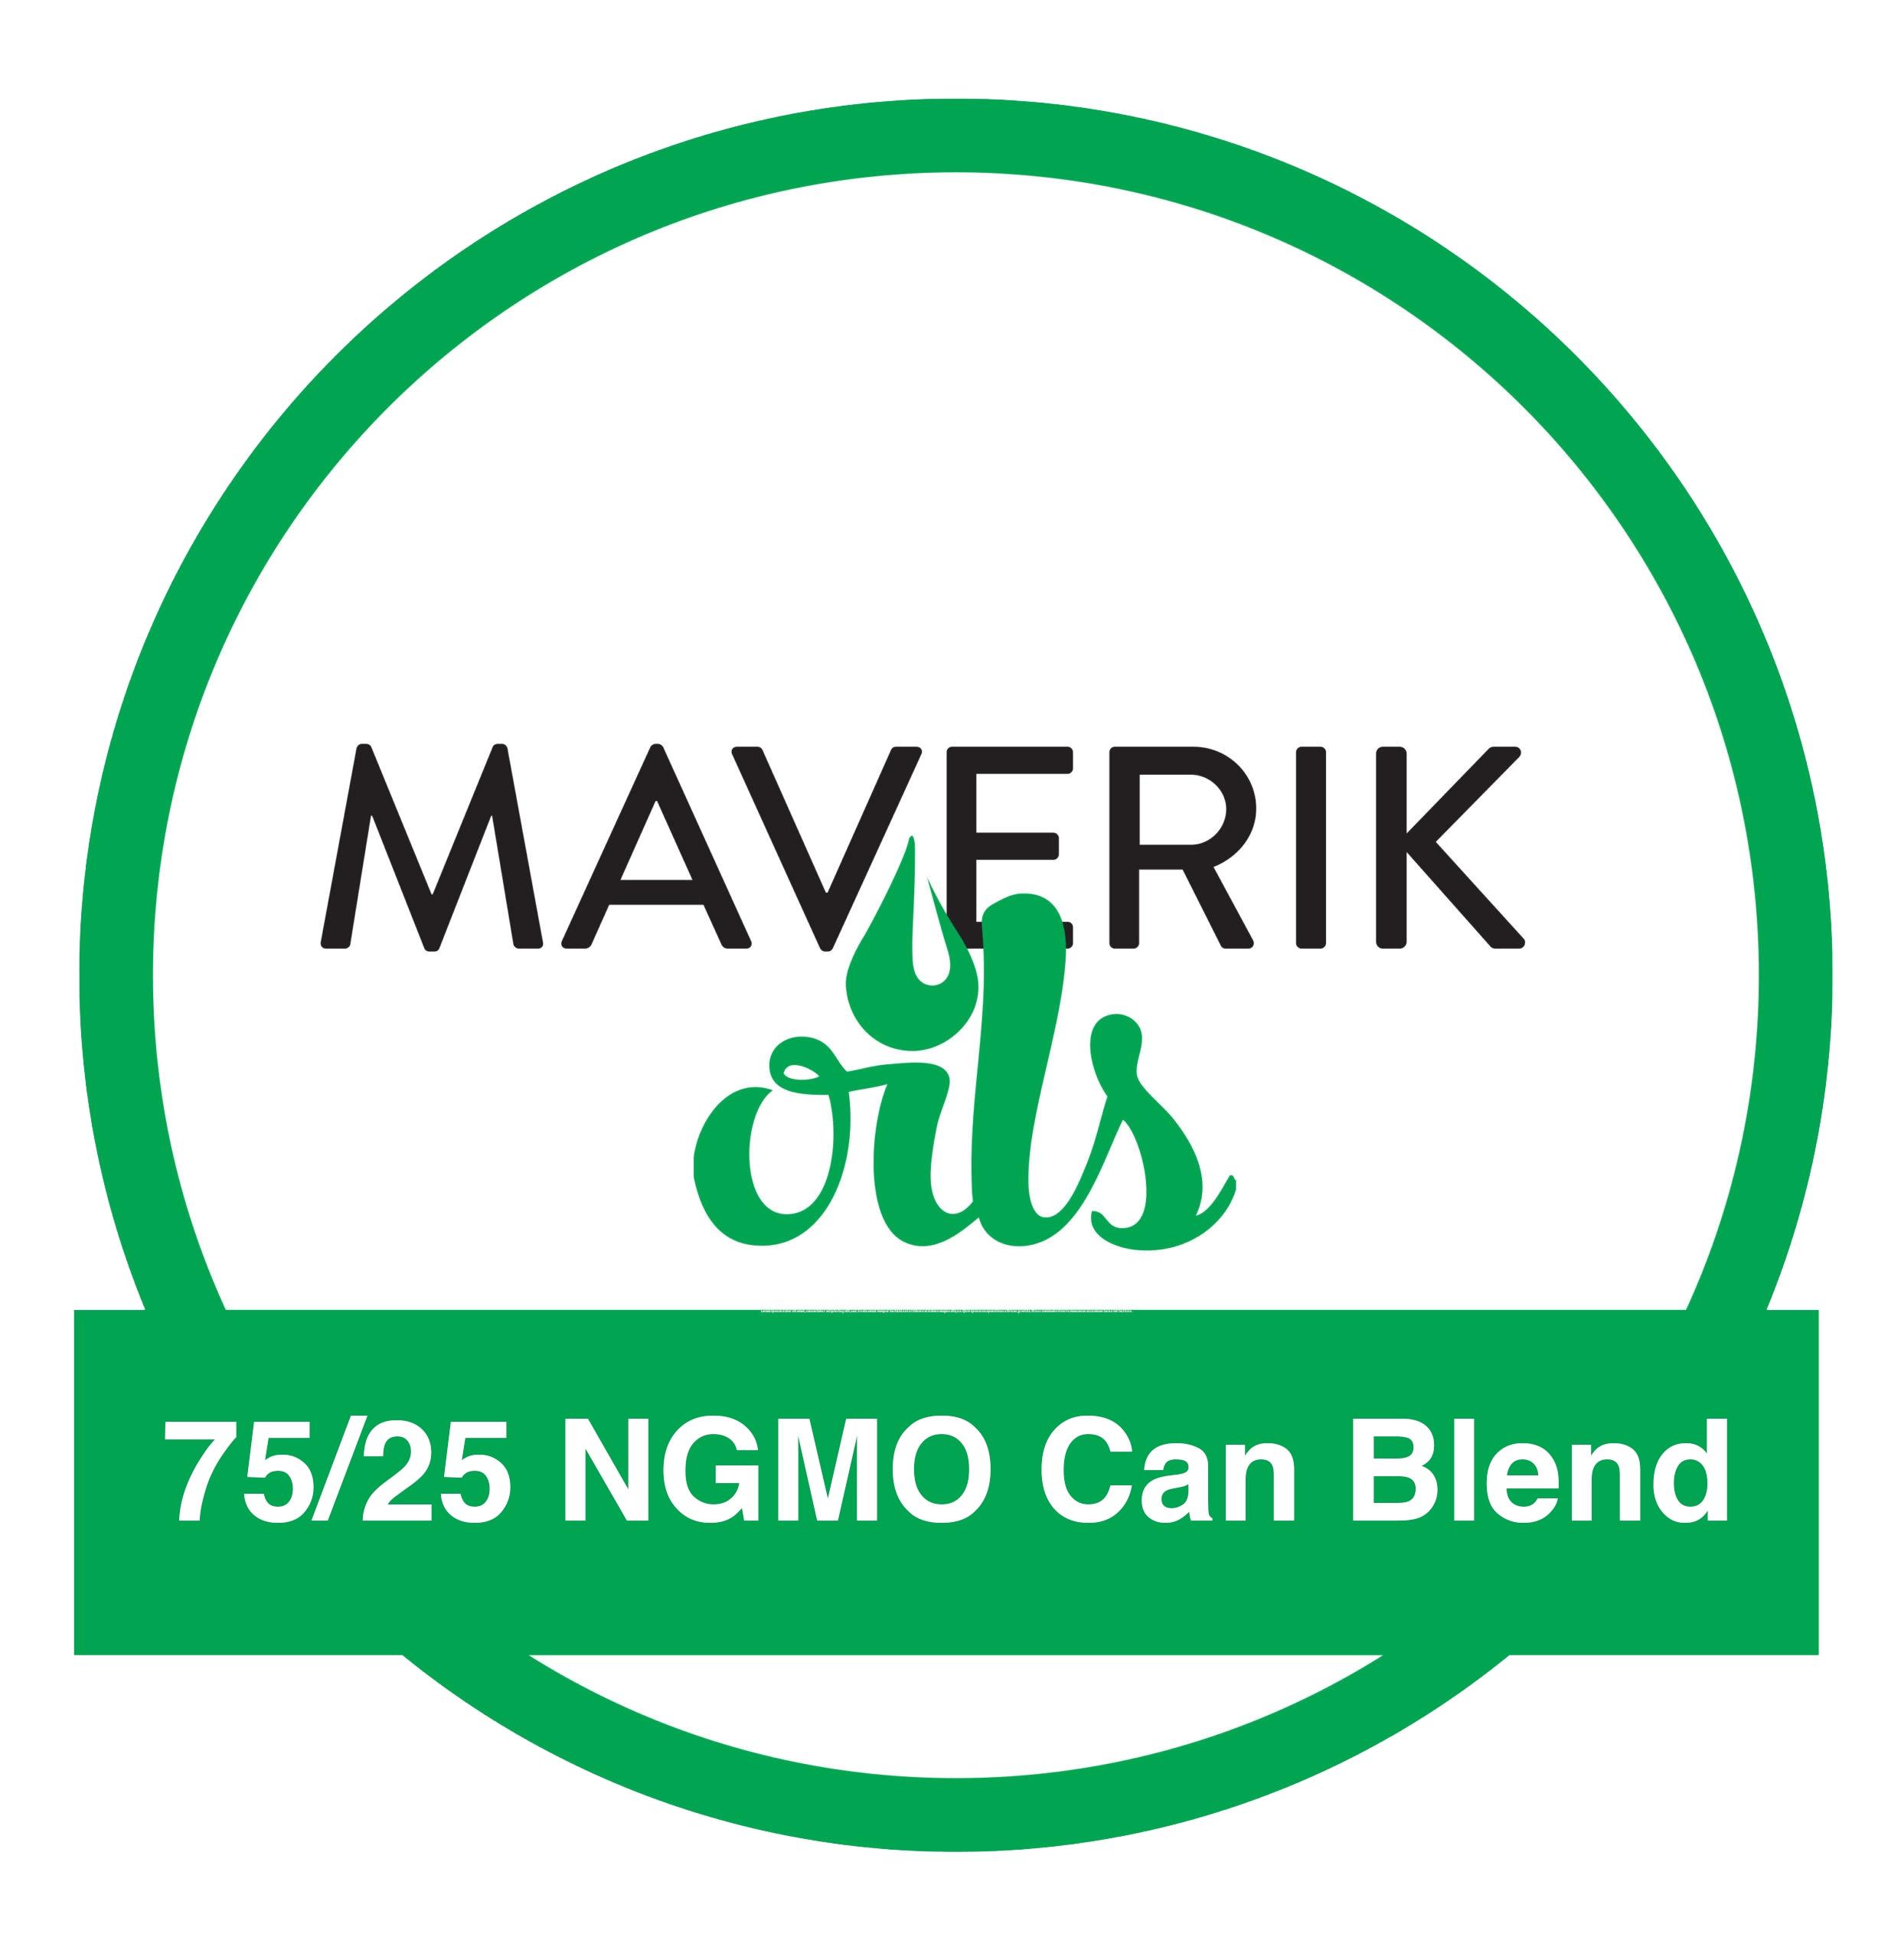 75/25 NGMO Can Blend